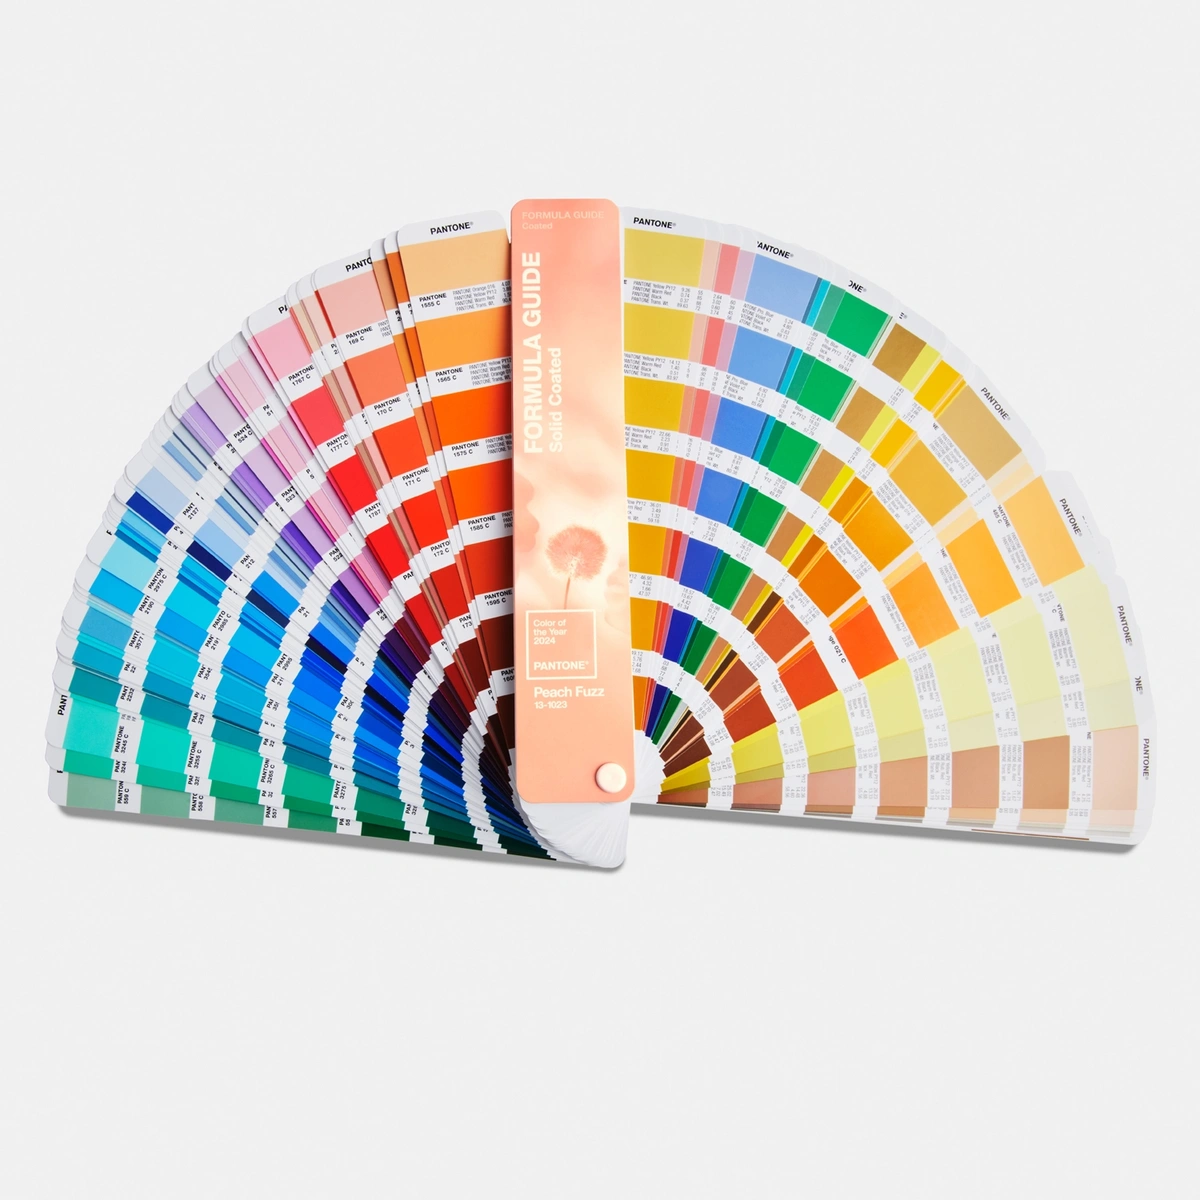 FORMULA GUIDE, LIMITED EDITION PANTONE COLOR OF THE YEAR 2024